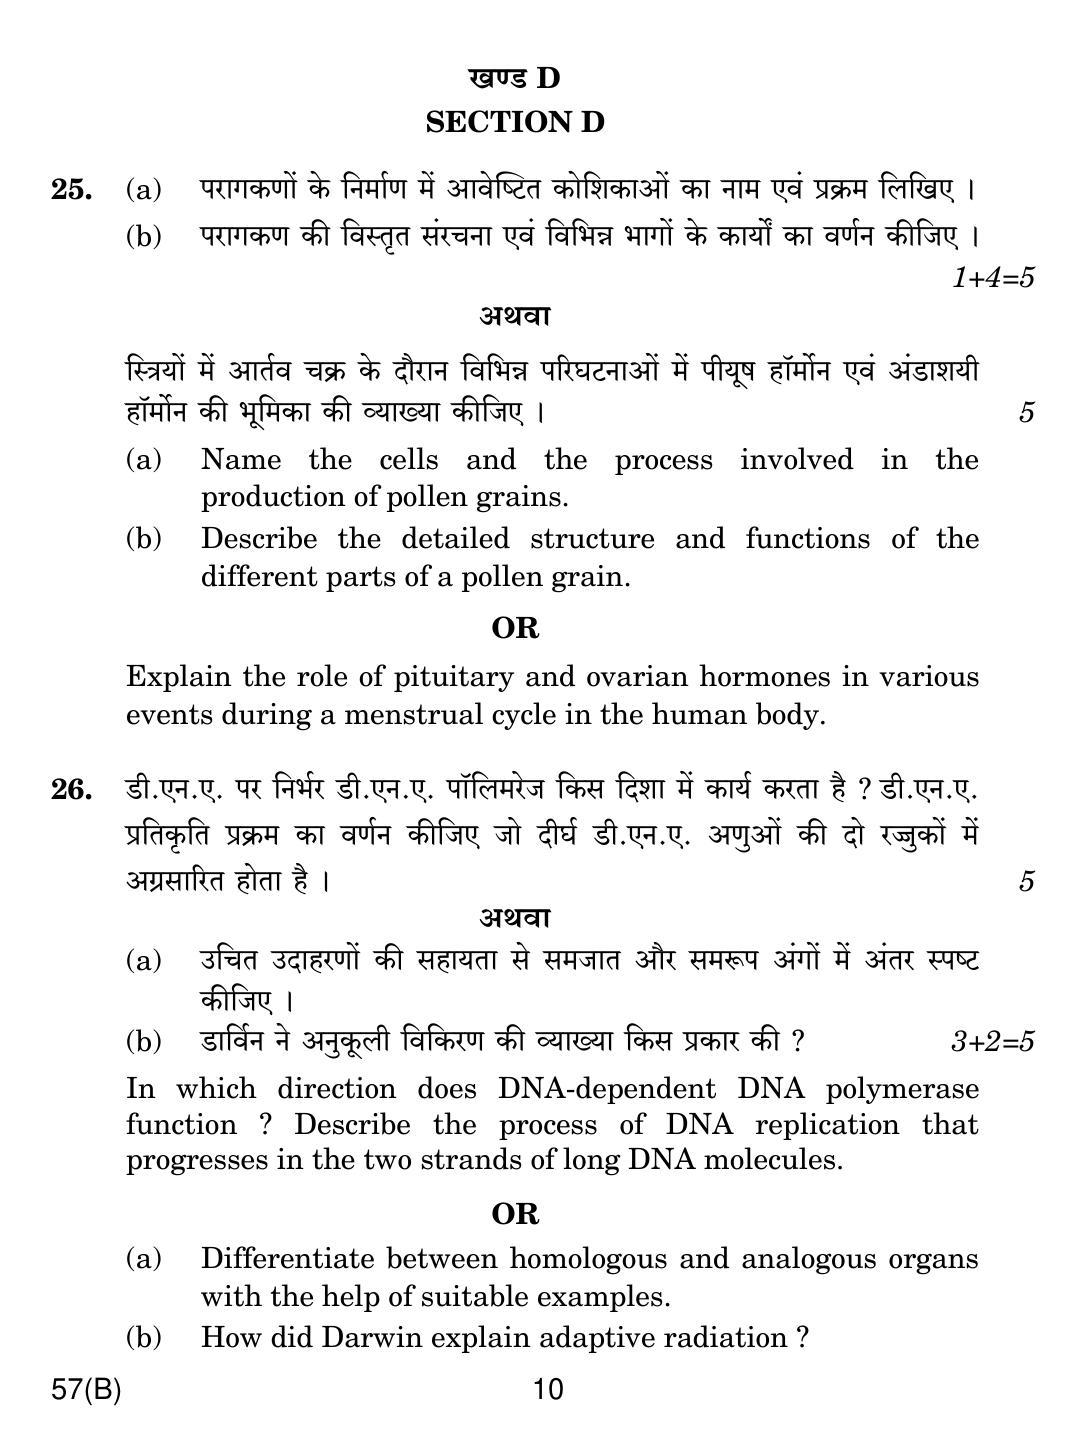 CBSE Class 12 57(B) BIOLOGY 2019 Compartment Question Paper - Page 10